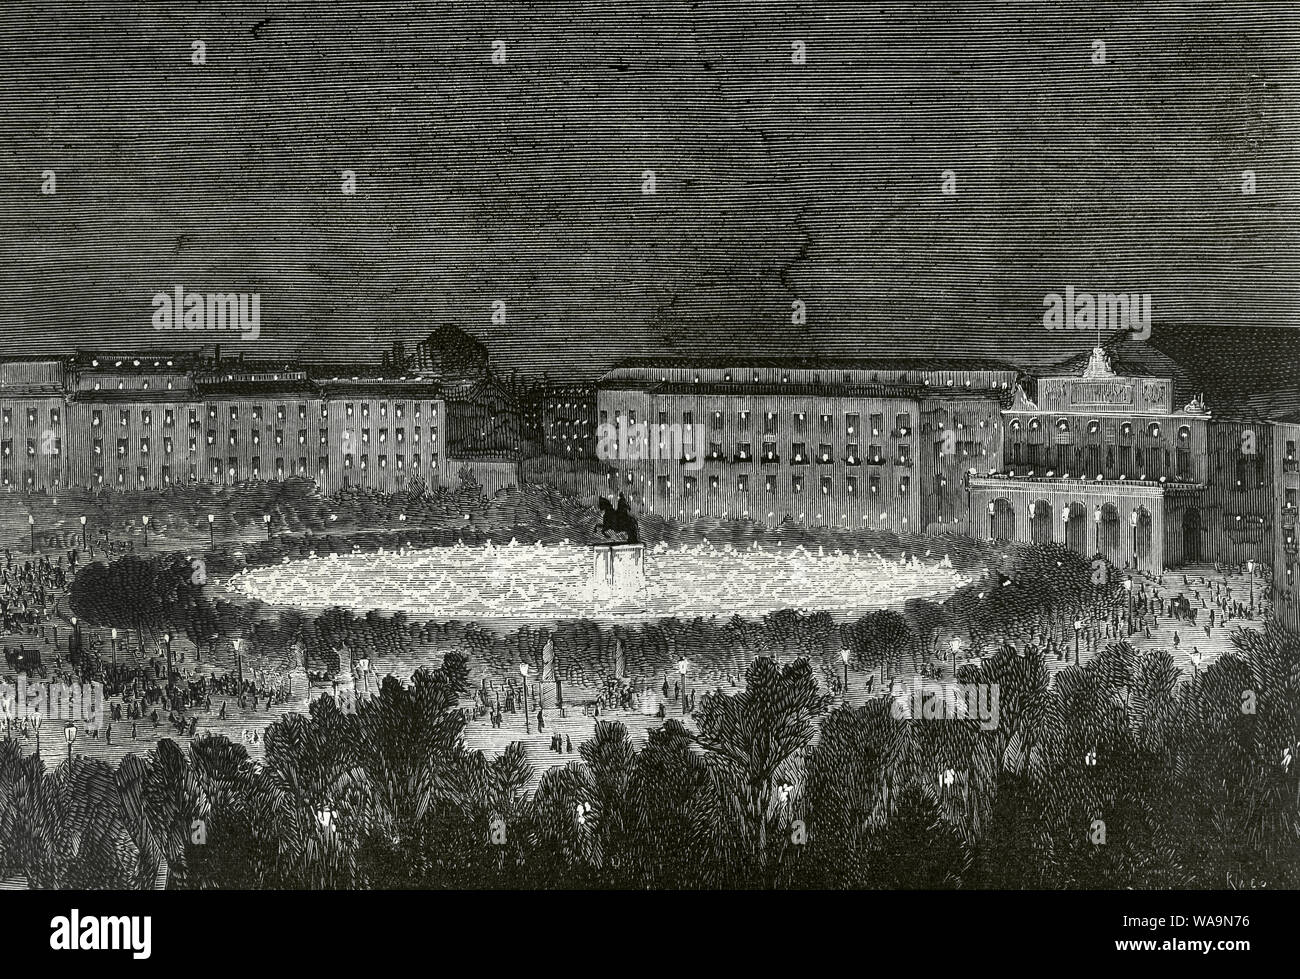 History of Spain. The Bourbon Restoration. Reign of Alfonso XII (1874-1885). Madrid, March 20, 1876. Celebrations on the occasion of the end of the Third Carlist War. Lighting of the Plaza de Oriente (Oriente Square). The garden lit in Venetian style. Engraving by Rico. La Ilustracion Española y Americana. March 30, 1876. Stock Photo